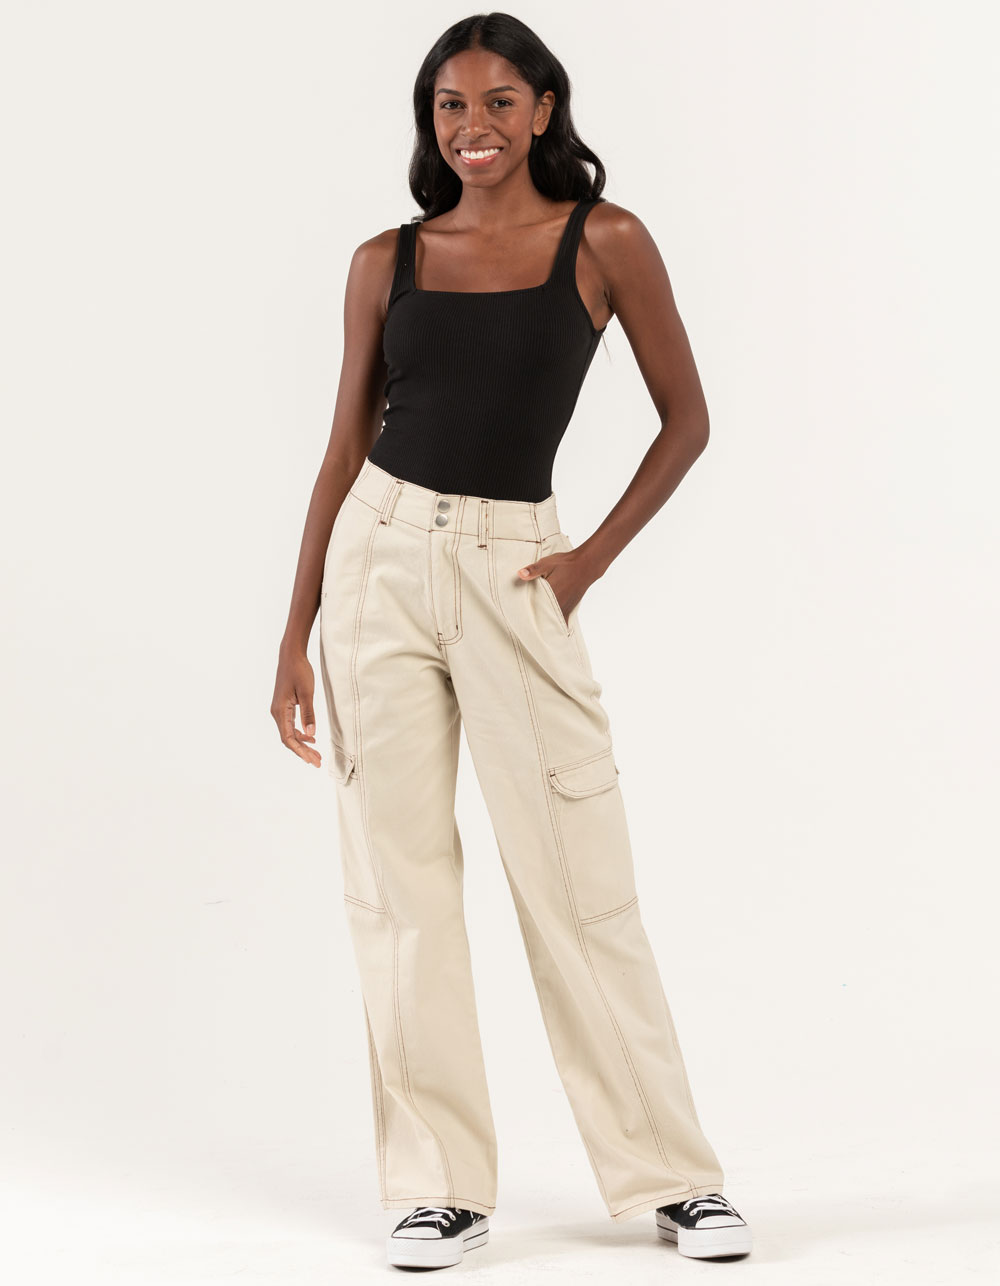 Women's Relaxed Cargo Pant, Women's New Arrivals